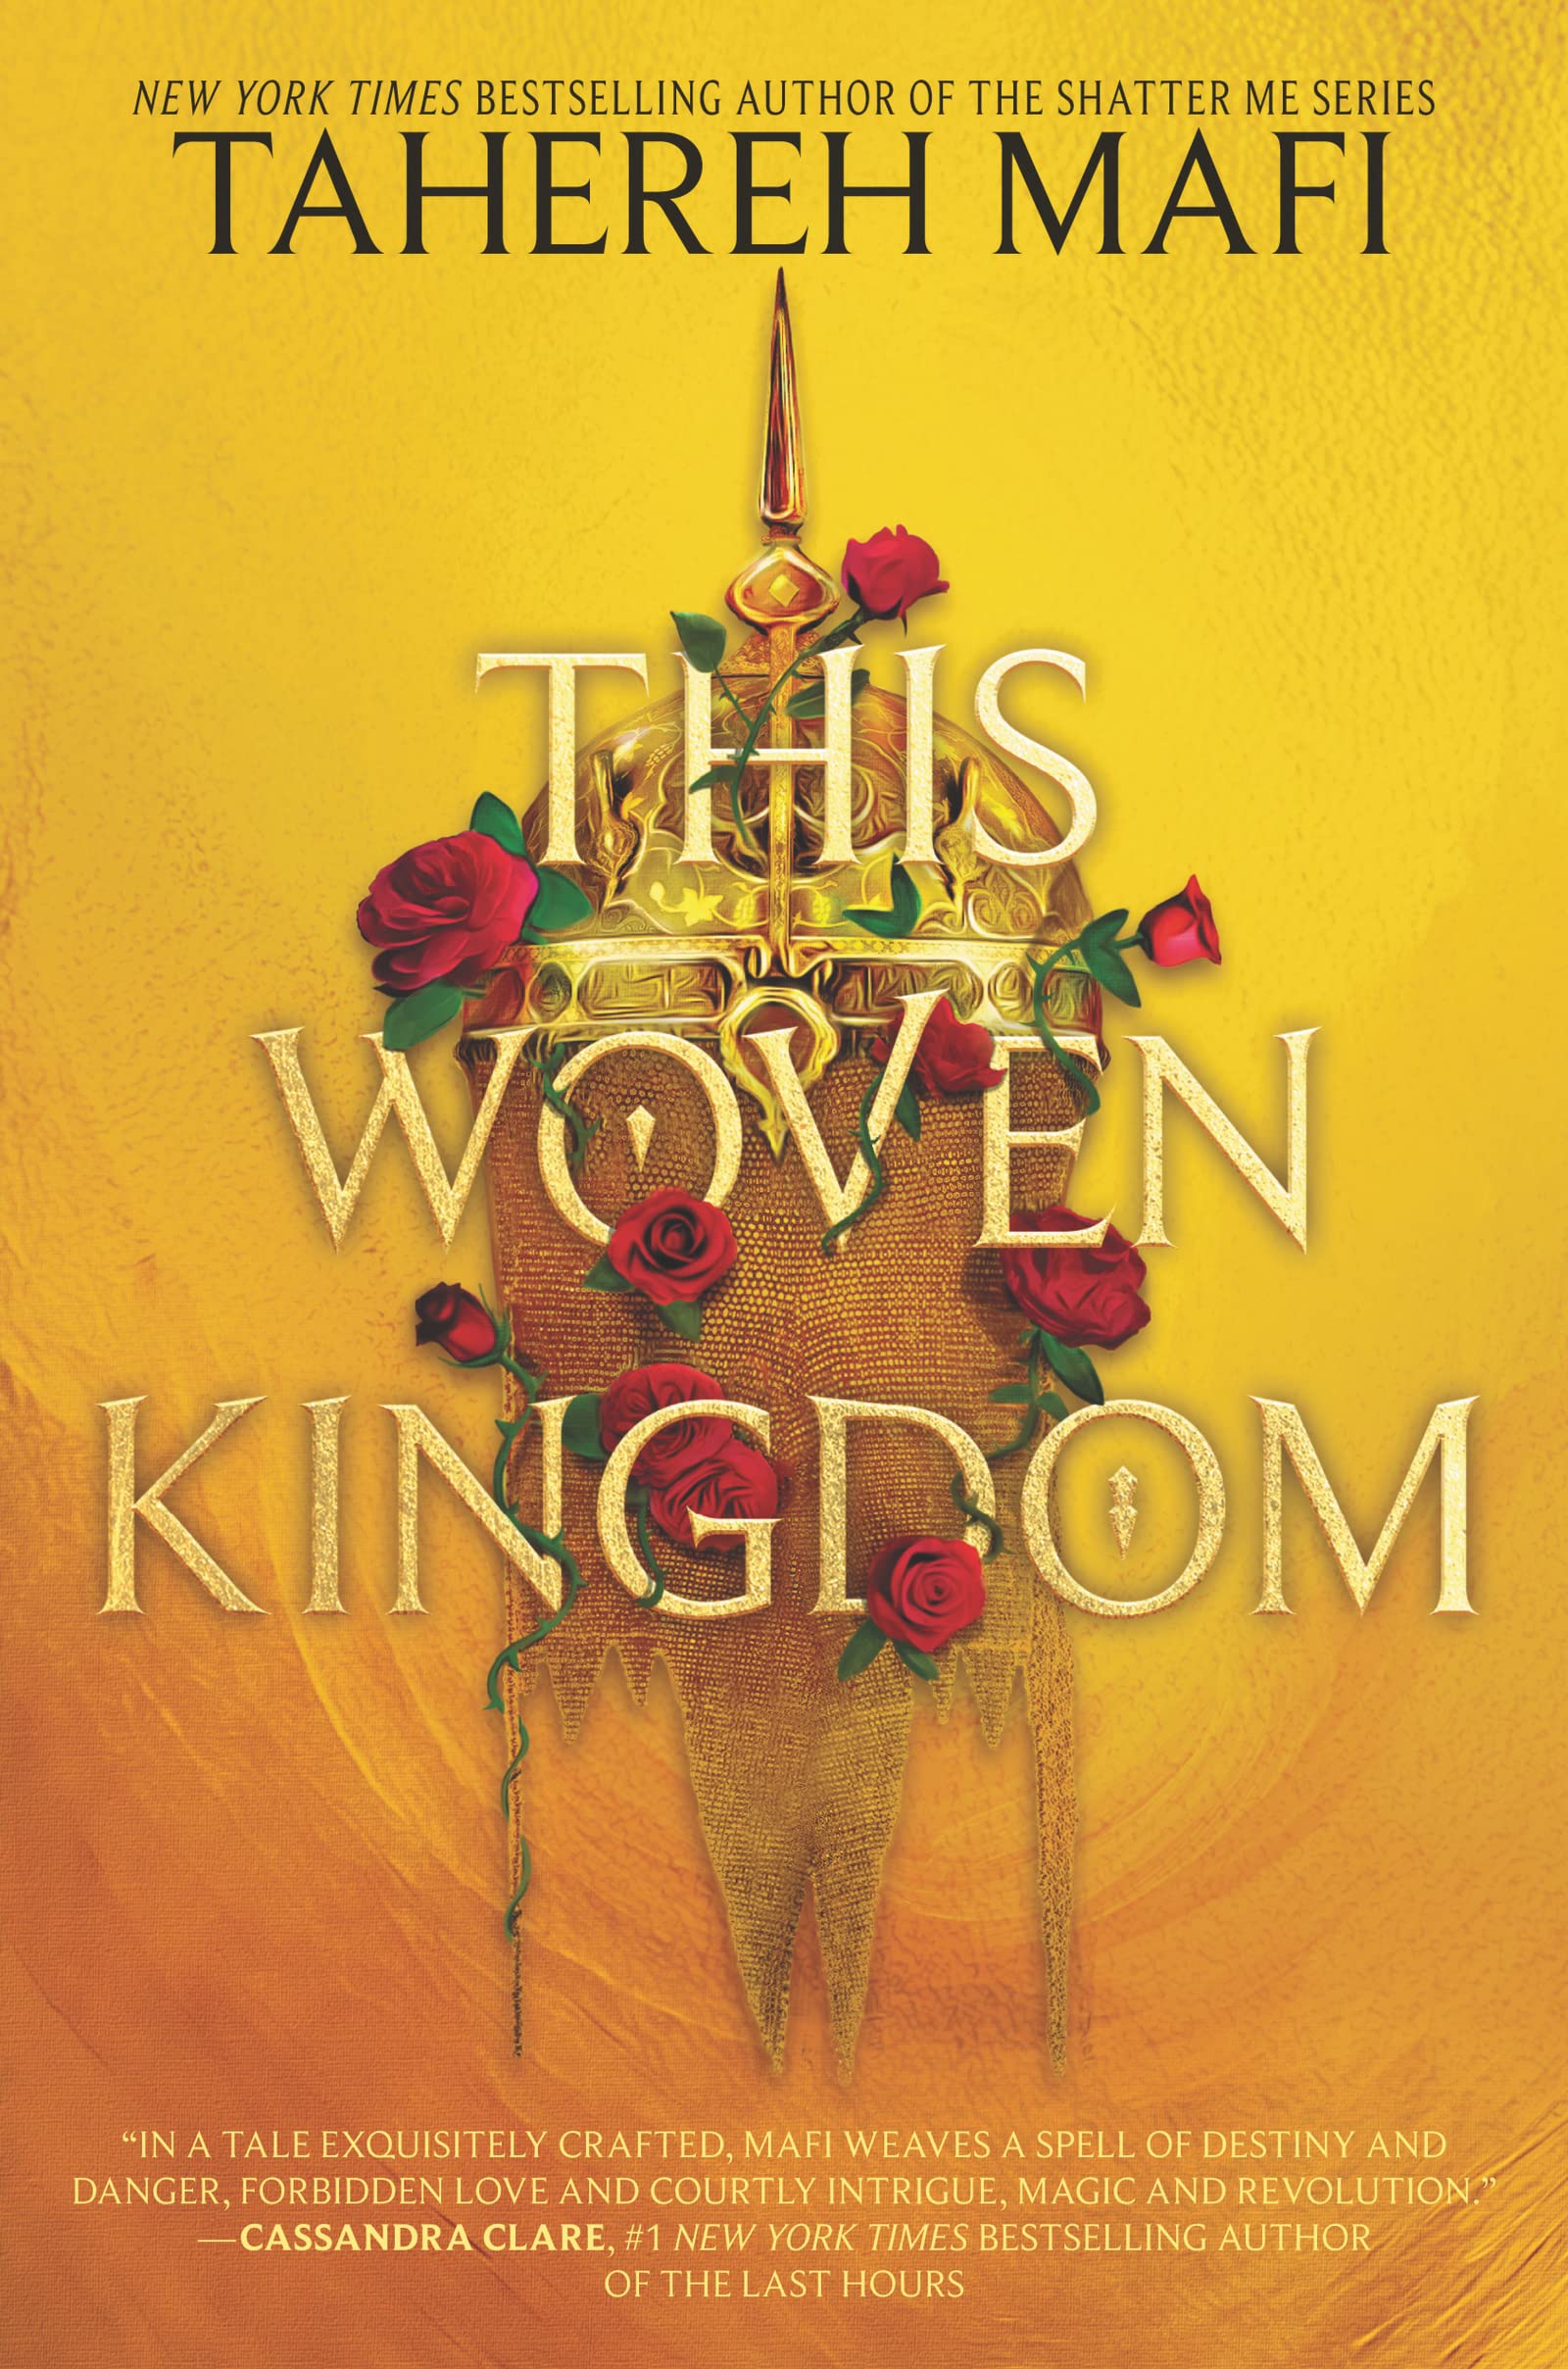 Cover of “This Woven Kingdom” by Tahereh Mafi